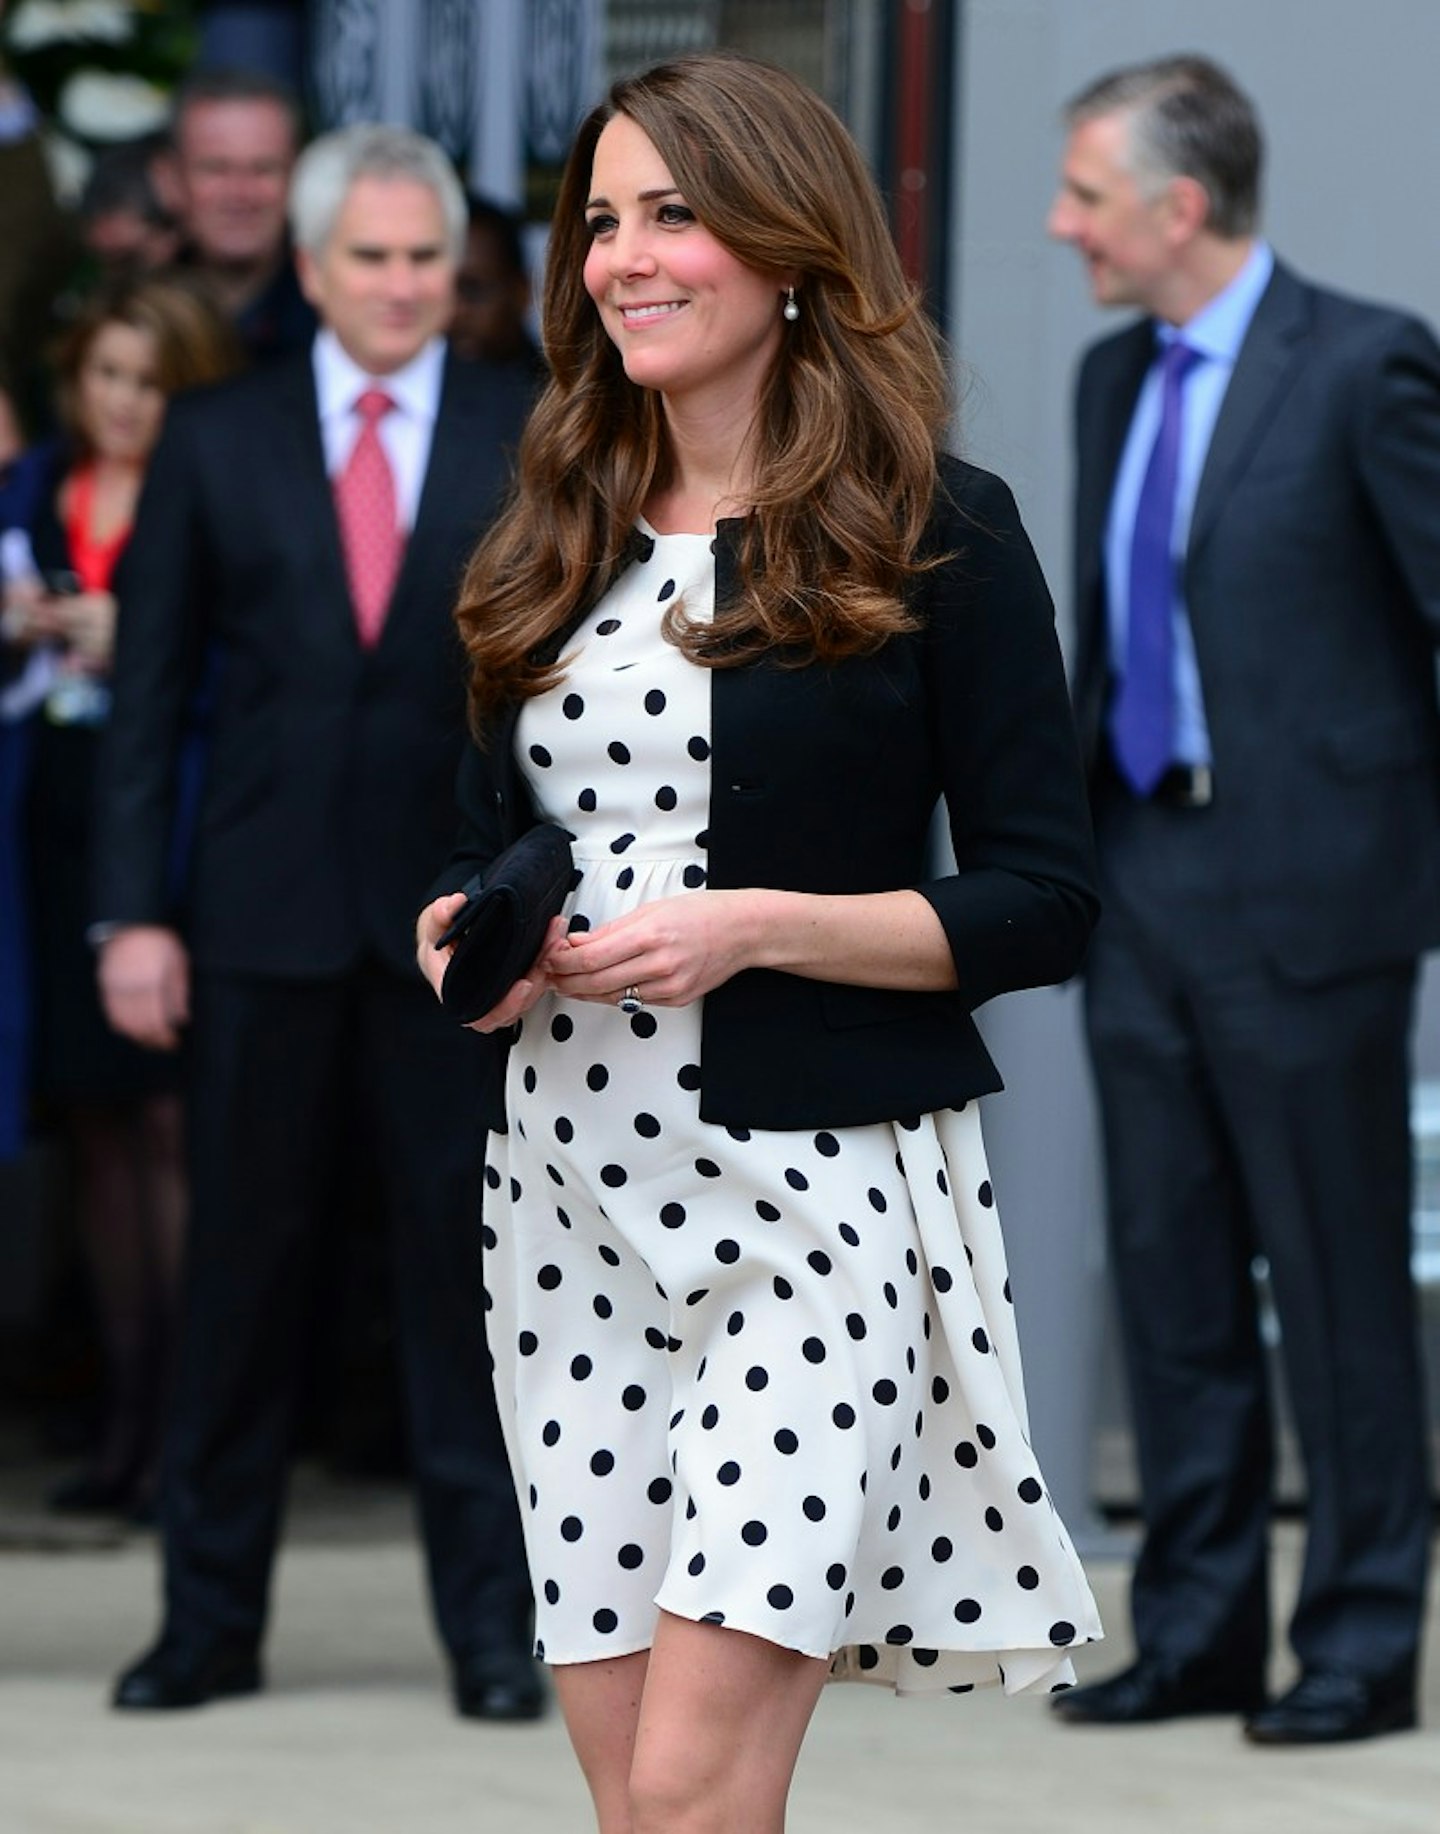 Kate turned to the high street for her maternity look in this snapshot. Pictured visiting the Harry Potter studios with Wills and Harry in London, Kate opted for a Topshop polka dot dress that suited the occasion perfectly. [Corbis]